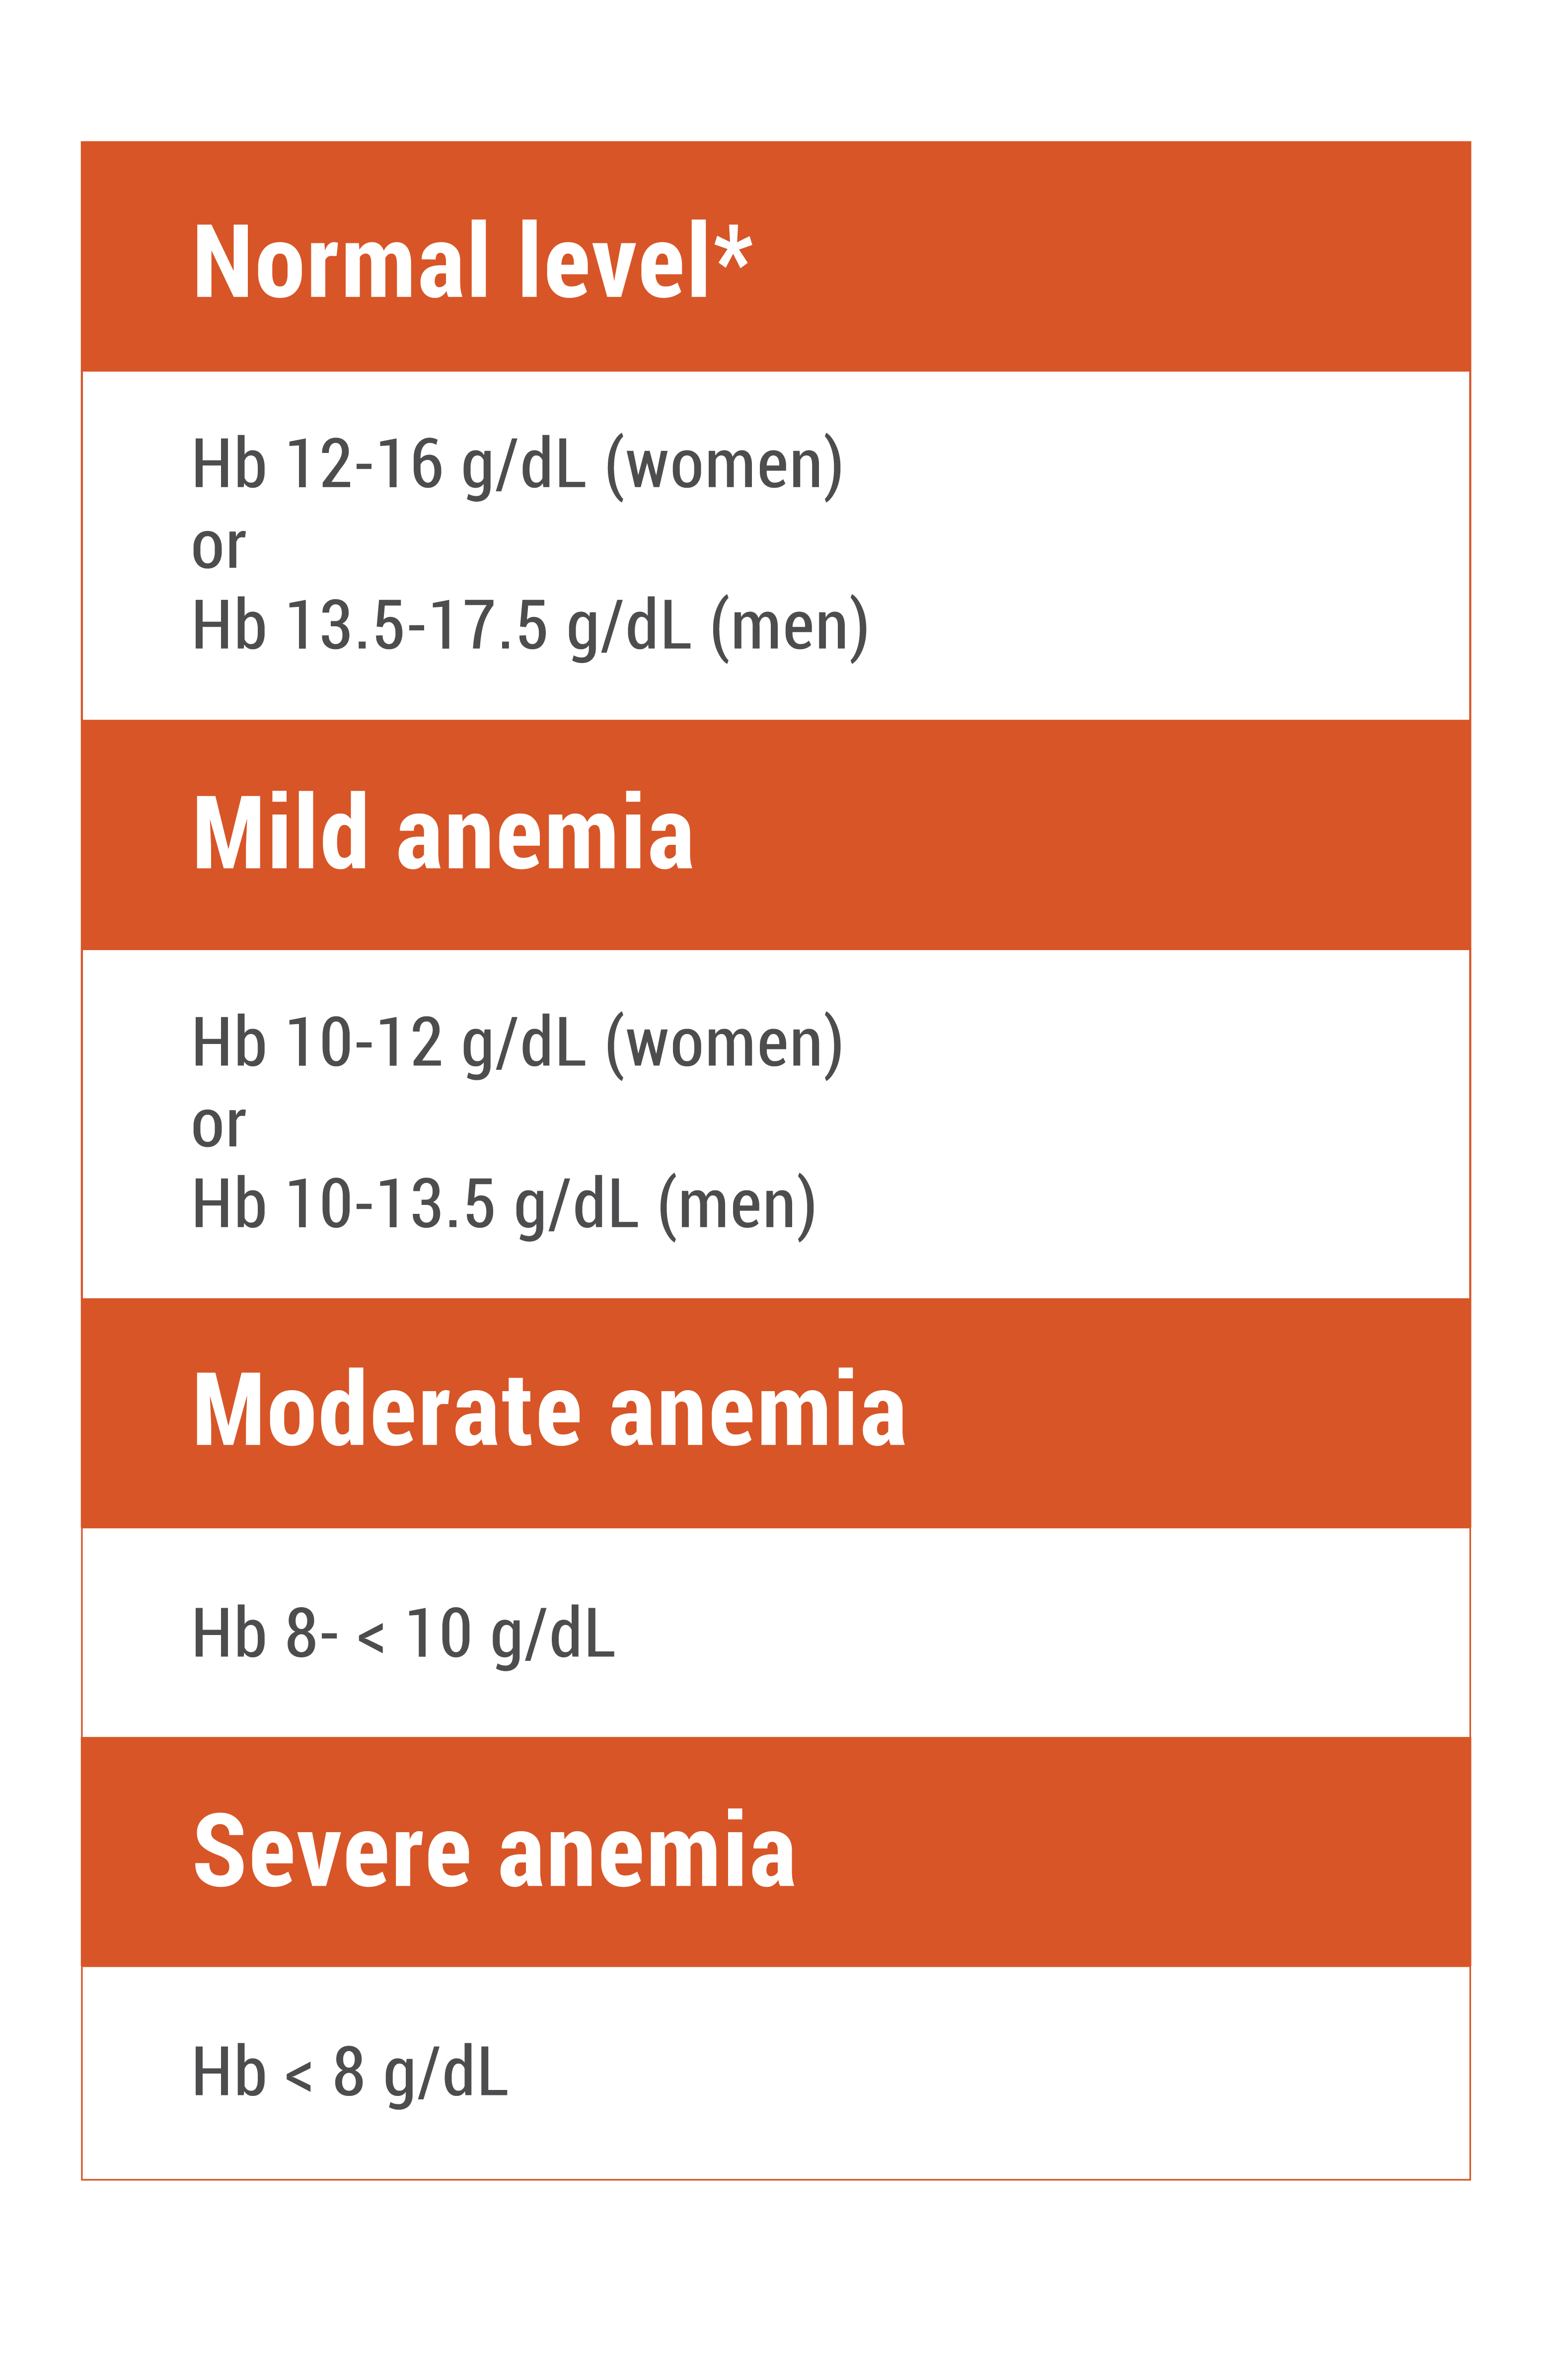 Normal levels of hemoglobin are 12-16 g/dL for women and 13.5-17.5 g/dL for men. In mild anemia, hemoglobin levels are 10 g/dL for women and 10-13.5 g/dL for men. In moderate anemia, hemoglobin levels are 8- < 10 g/dL. In severe anemia, hemoglobin levels are < 8 g/dL.